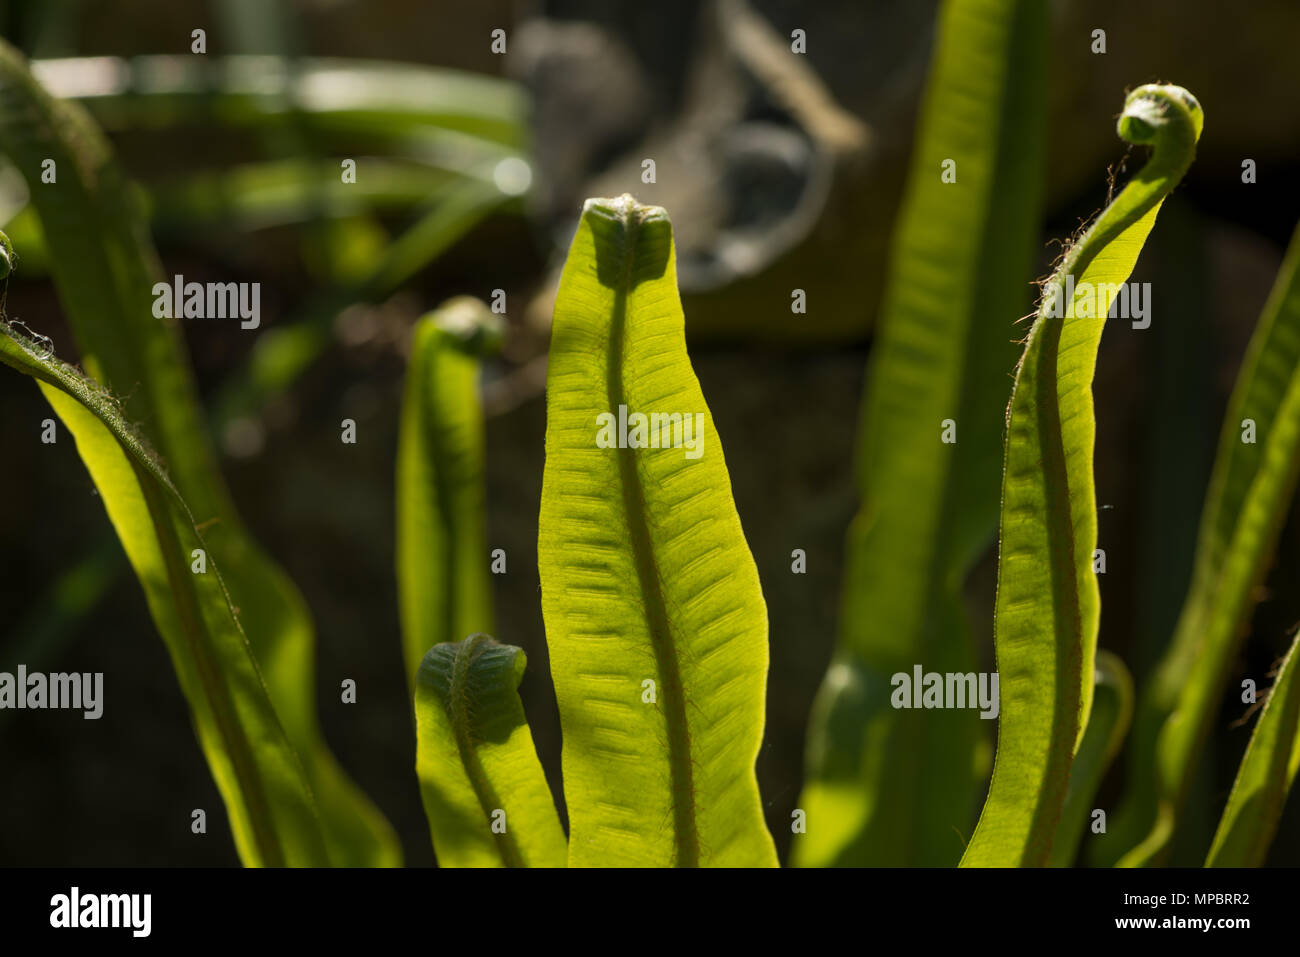 Wild hart's-tongue fern Asplenium scolopendrium frond backlit revealing fine hairs, sori, strands and developing spores tip curled back like cobra Stock Photo